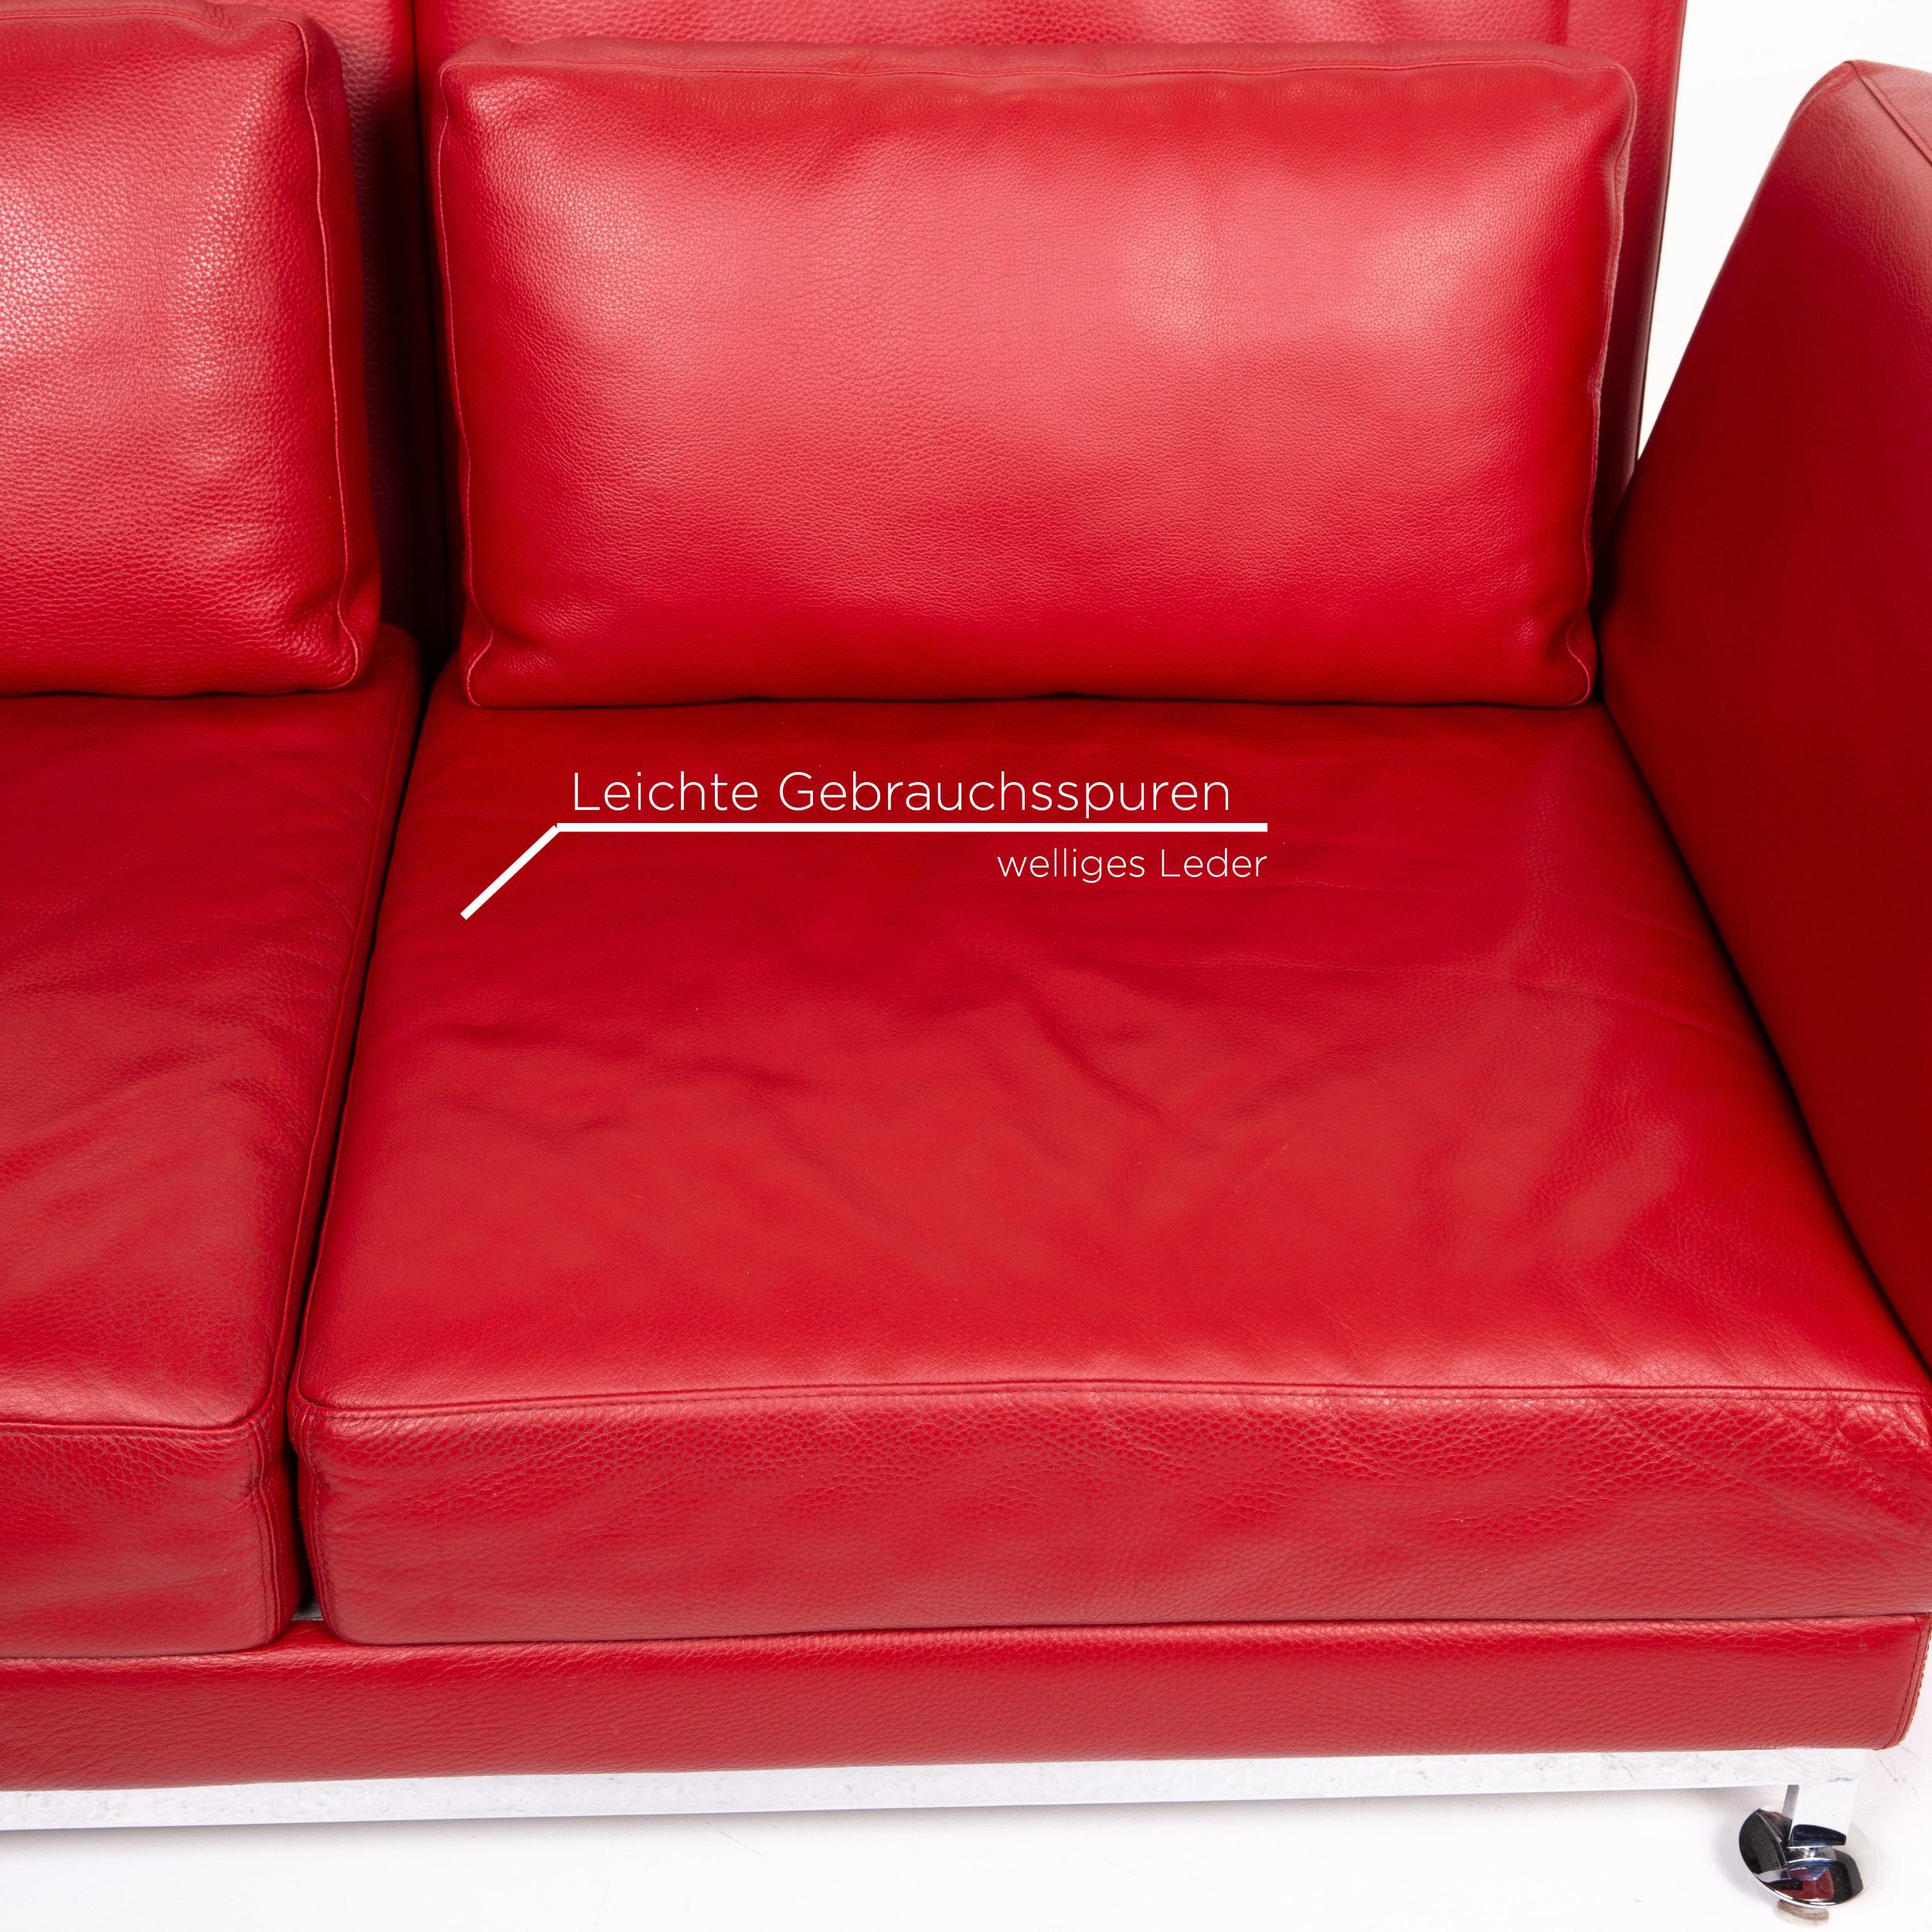 German Brühl & Sippold Moule Leather Sofa Red Two-Seat Function Sofa Bed Sleep For Sale